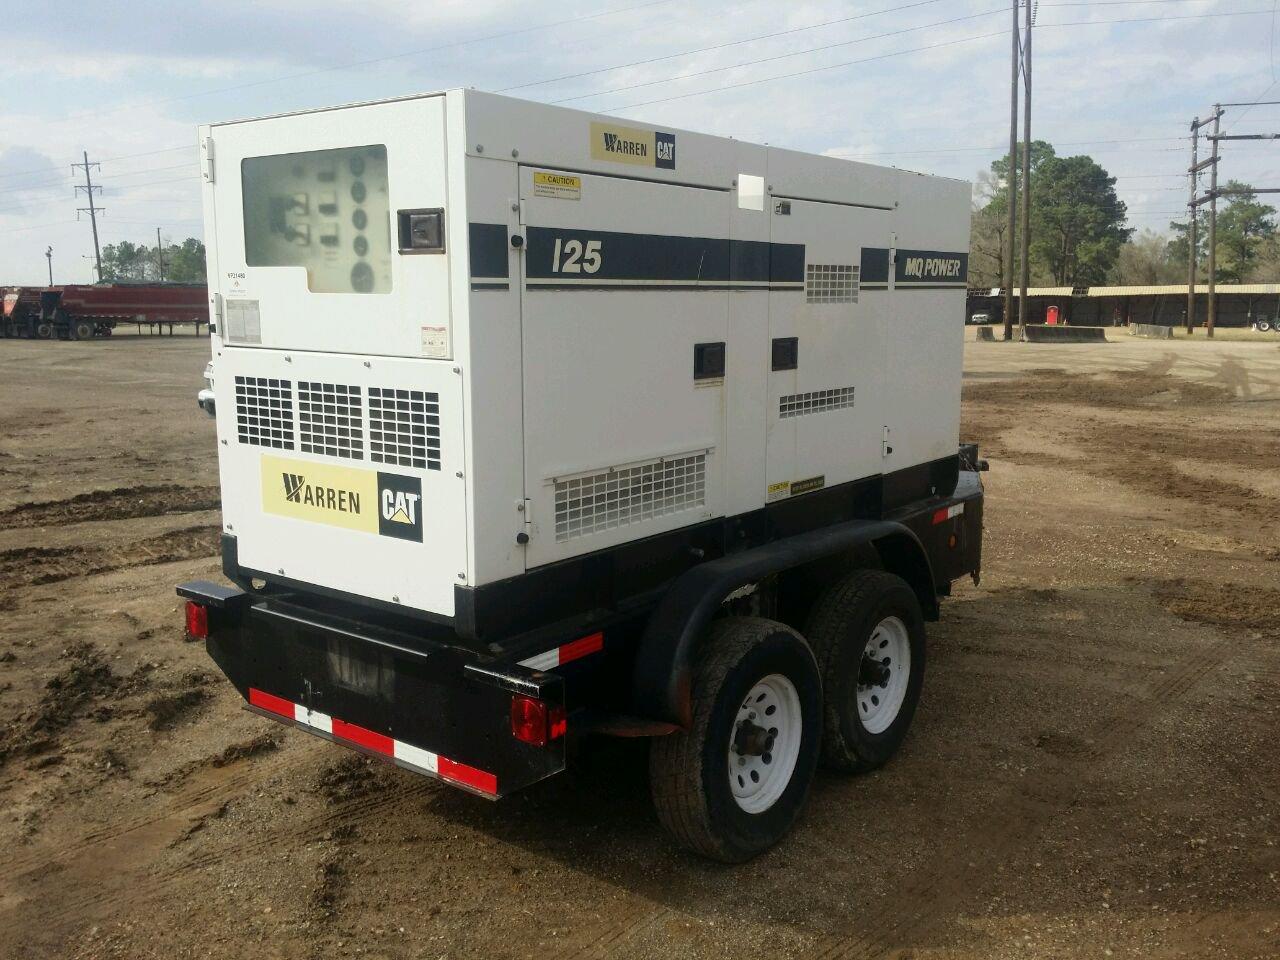 2007 MQ Power Corp Model DCA-125 SSIU Generator | Video Available